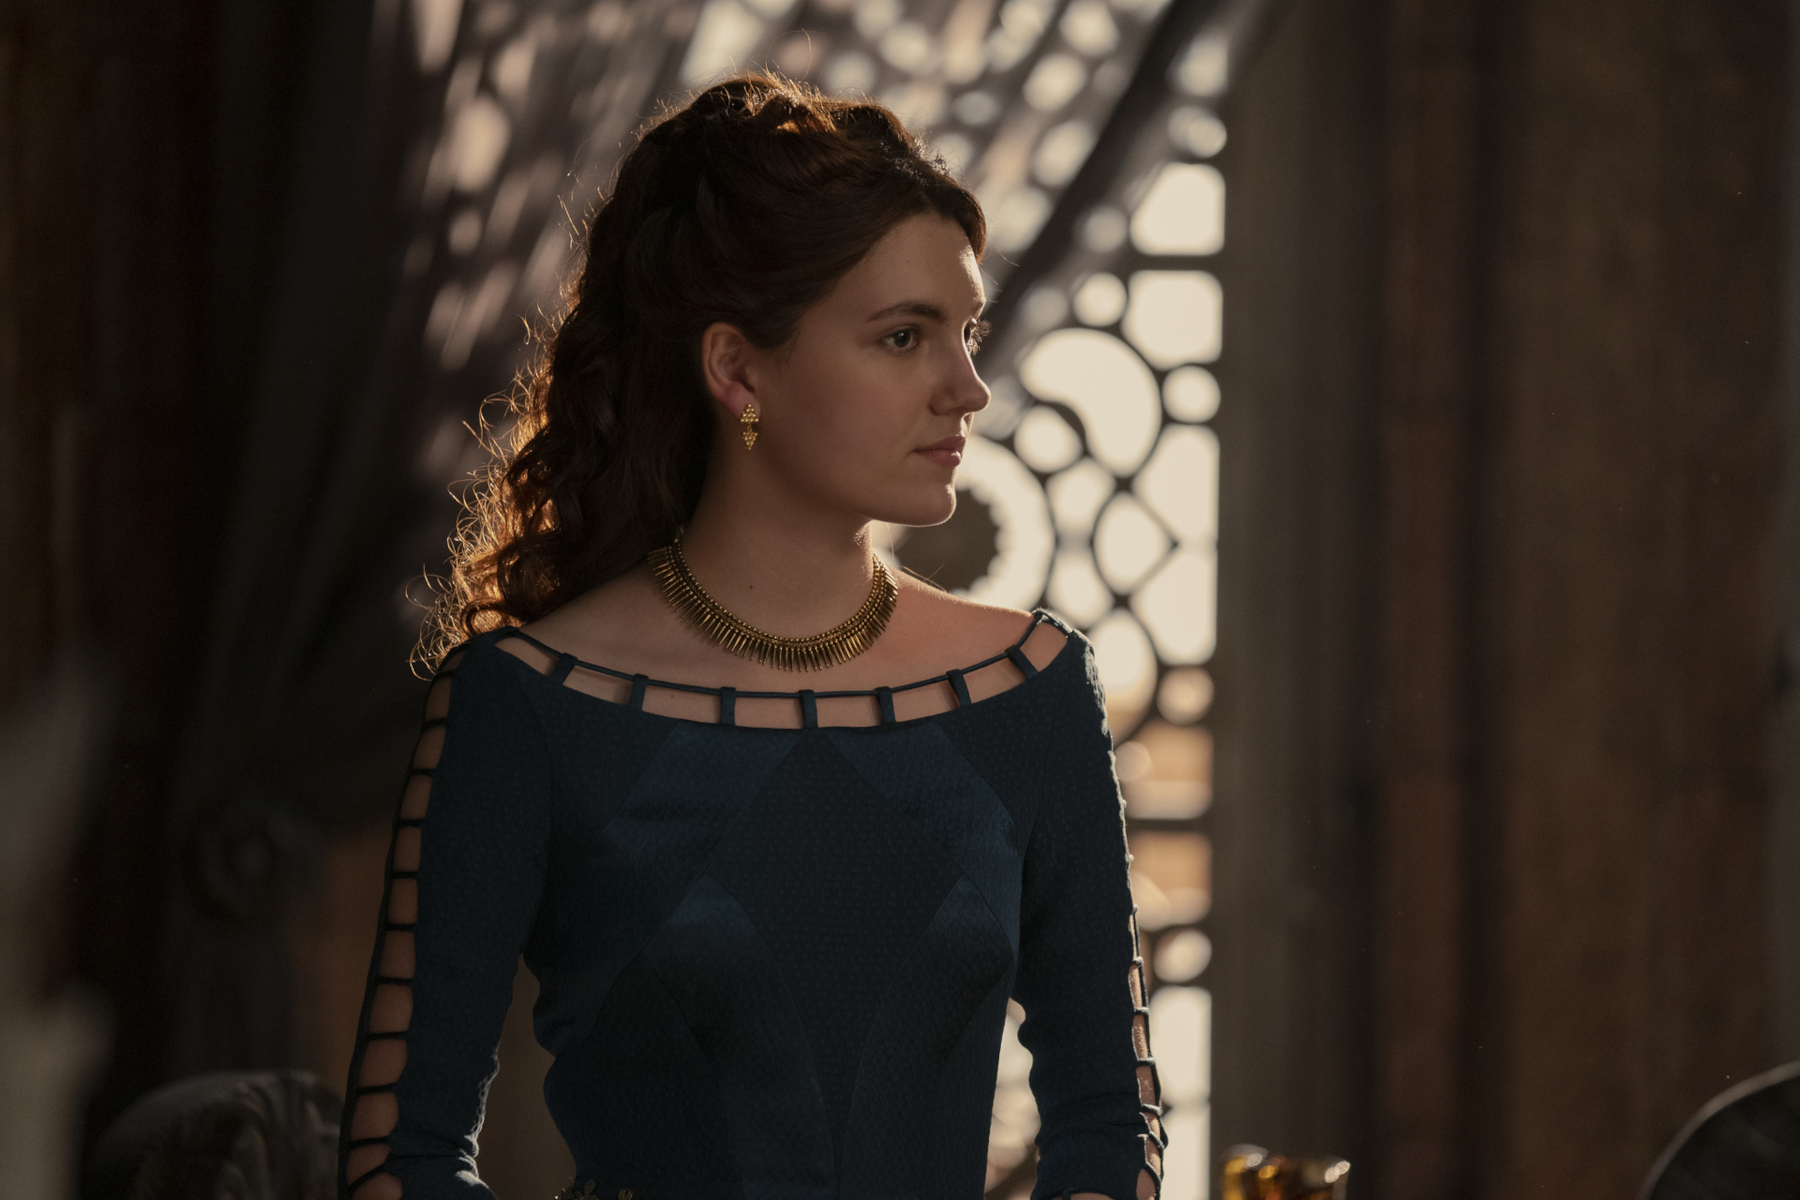 Emily Carey as Alicent Hightower in 'House of the Dragon' Season 1 on HBO. She's wearing a green dress that dips at the shoulders, and her face is turned to the side.